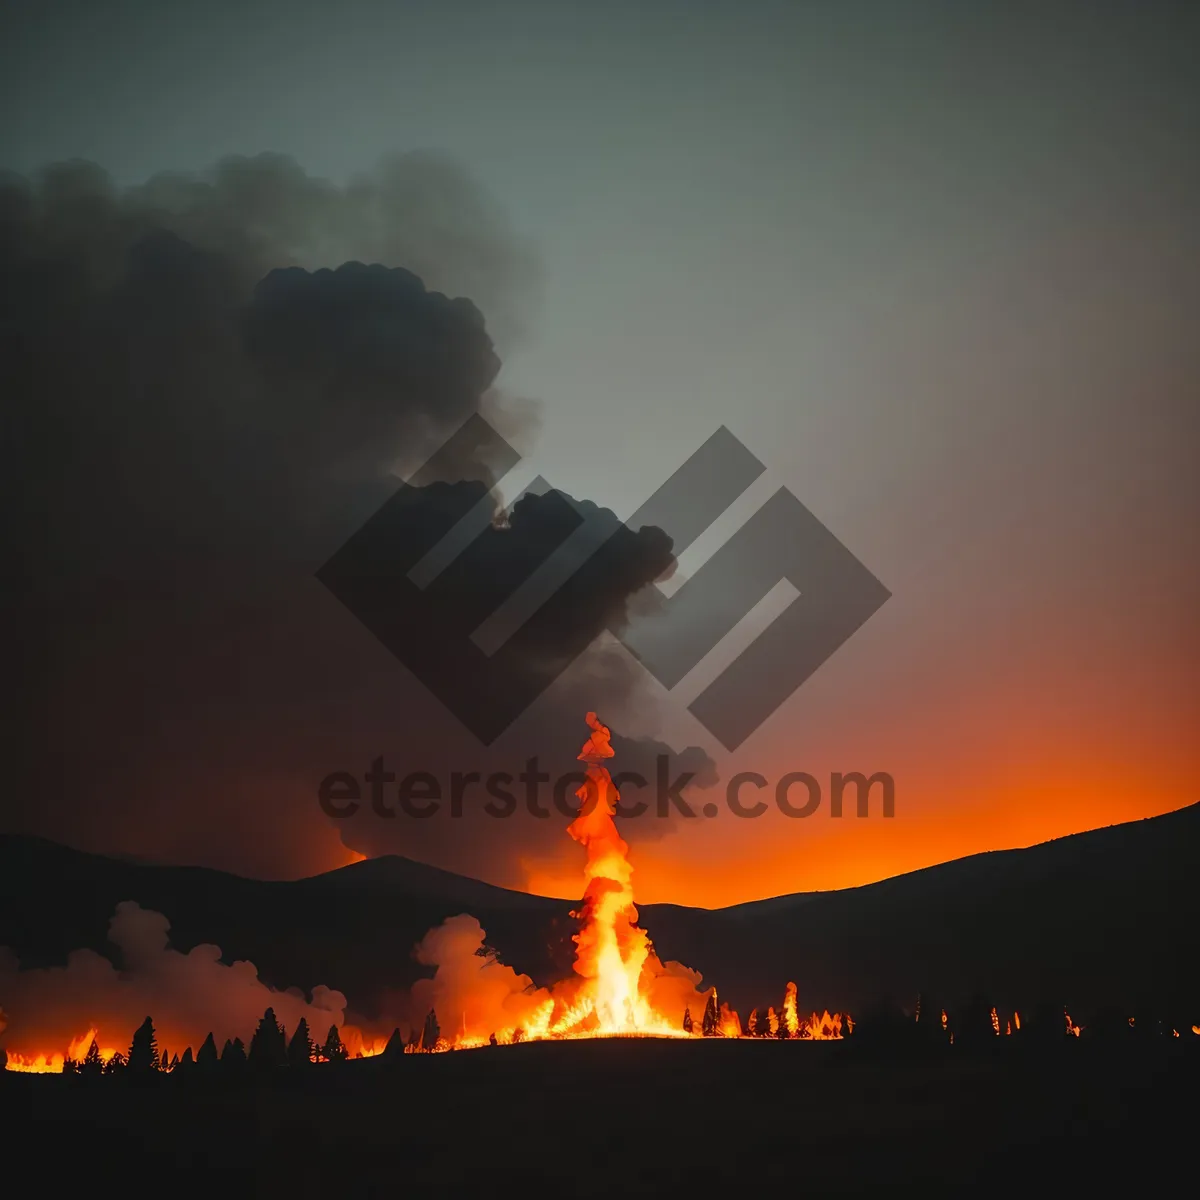 Picture of Blazing Volcanic Sunset: Fiery Mountain Illuminated by Orange Flames